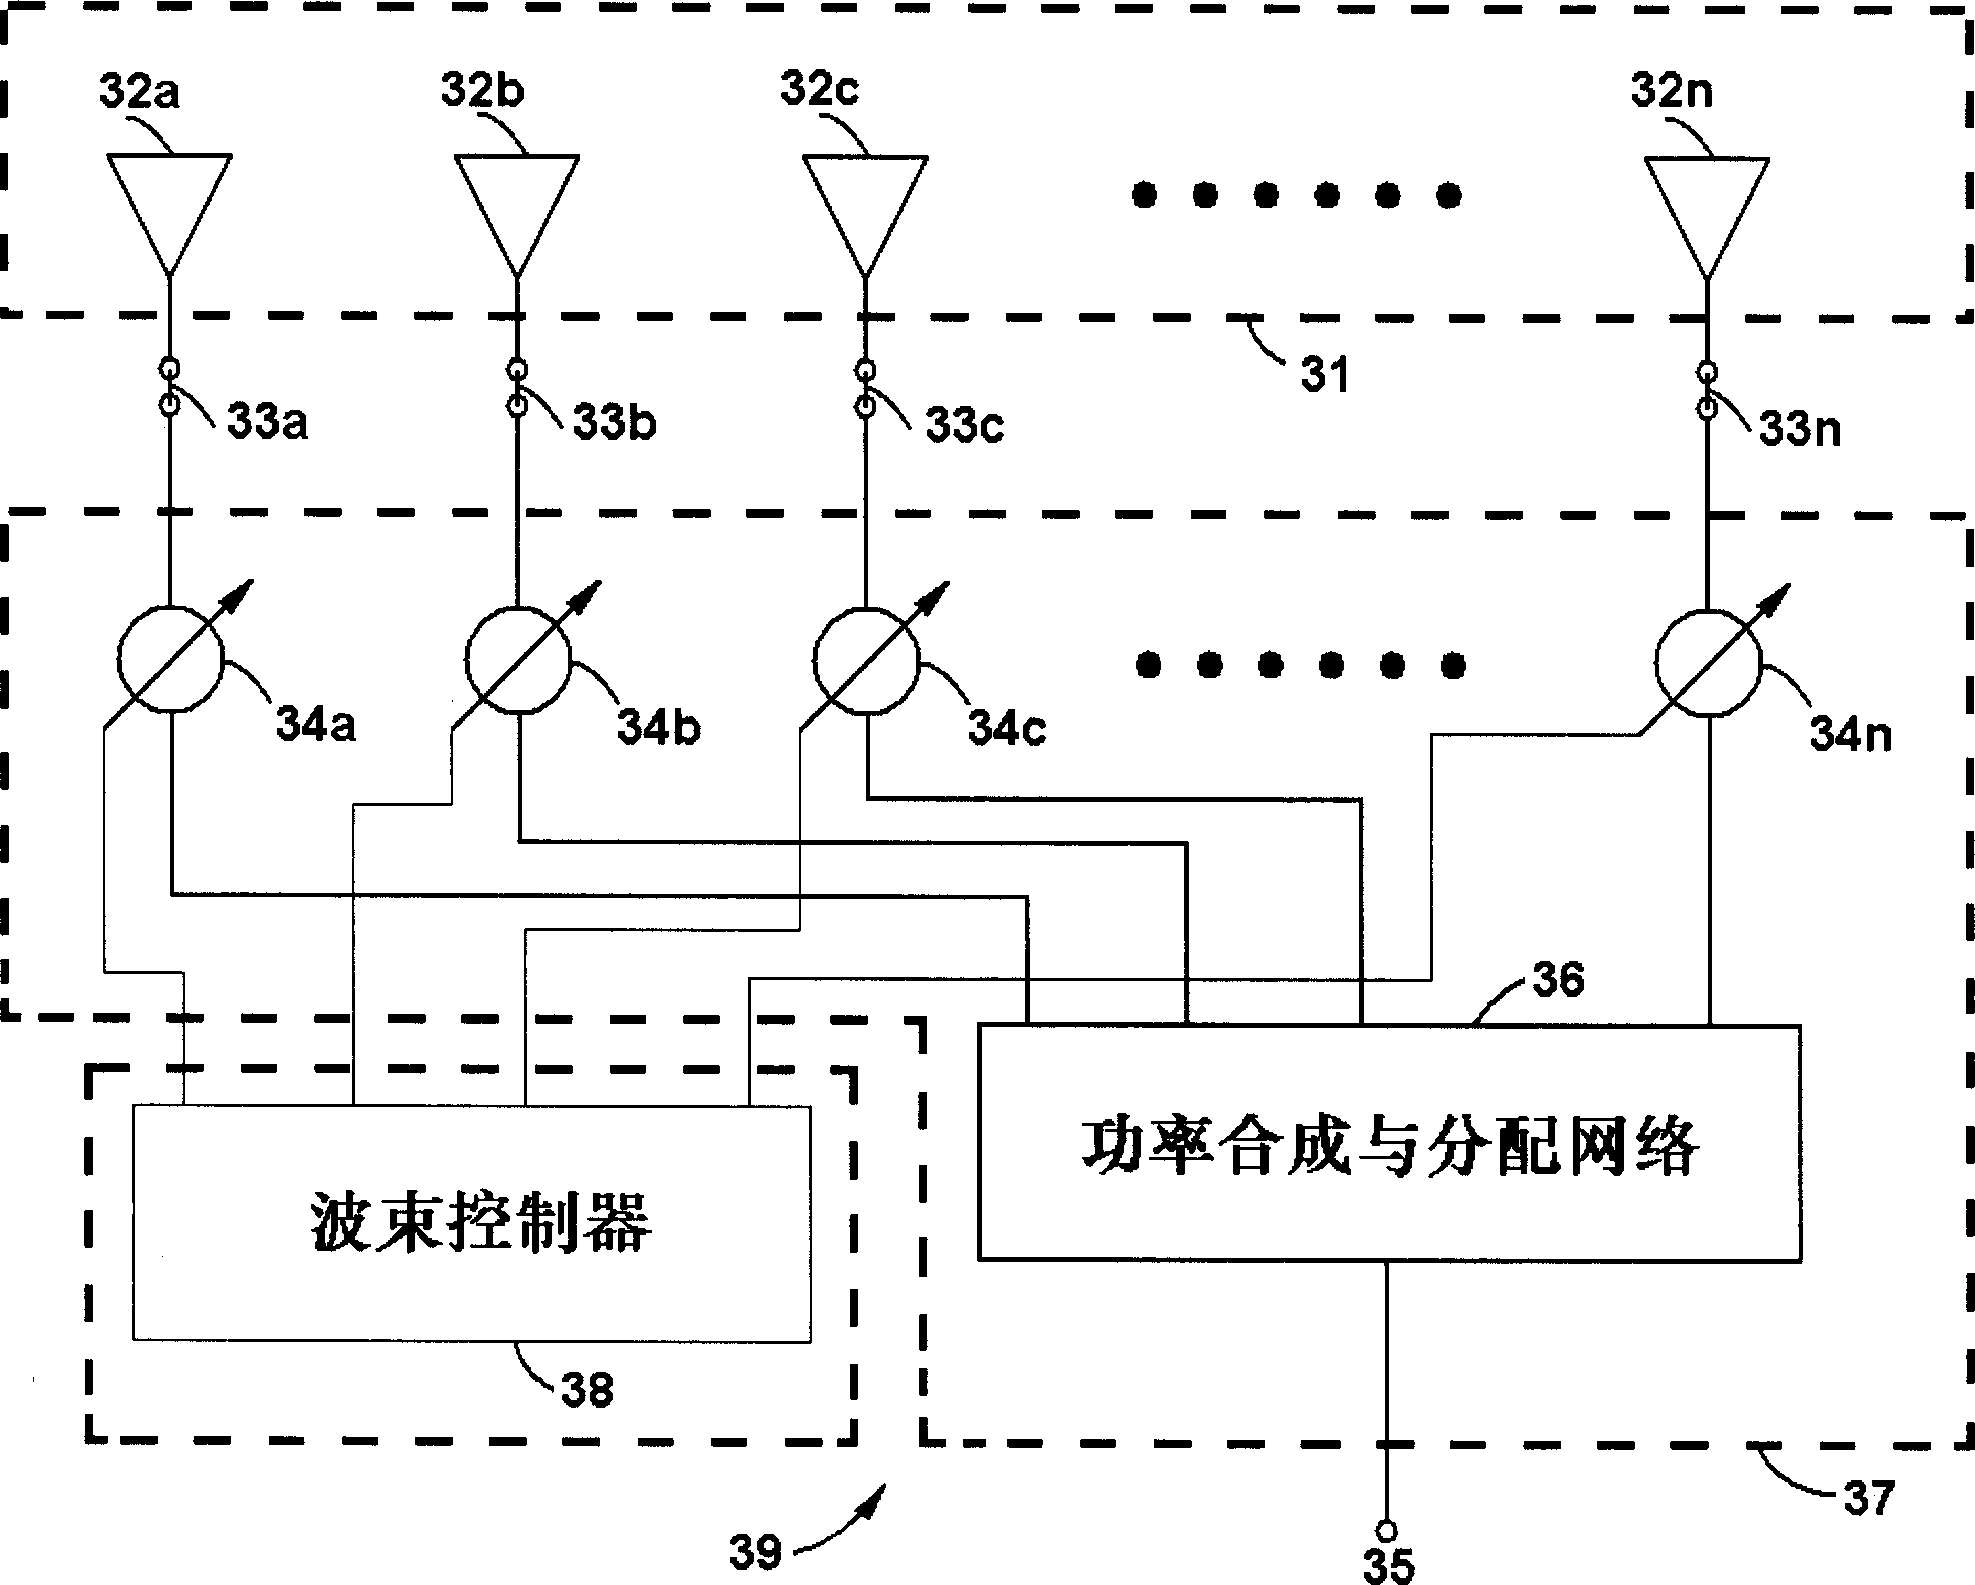 Beam forming network with continuously variable differential phase